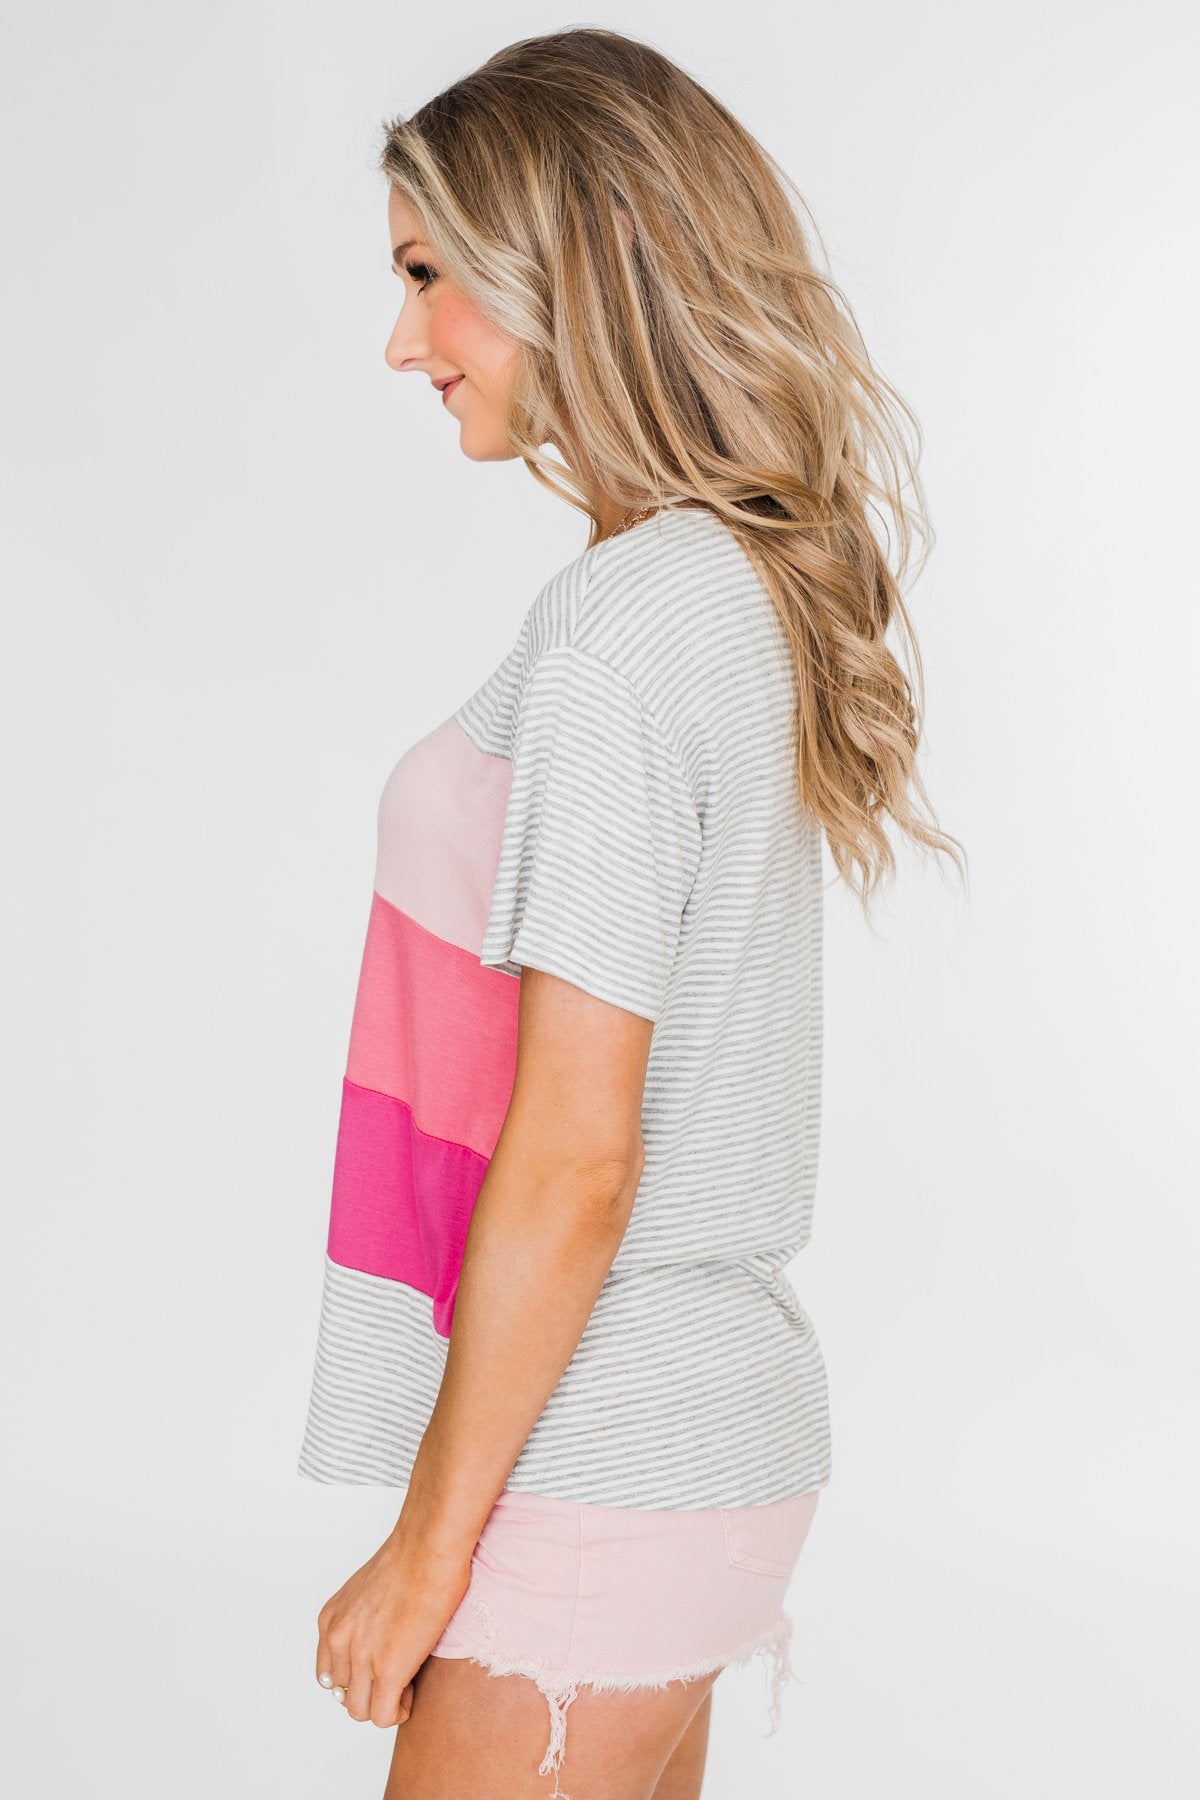 One Day At A Time Striped Color Block Top- Shades of Pink